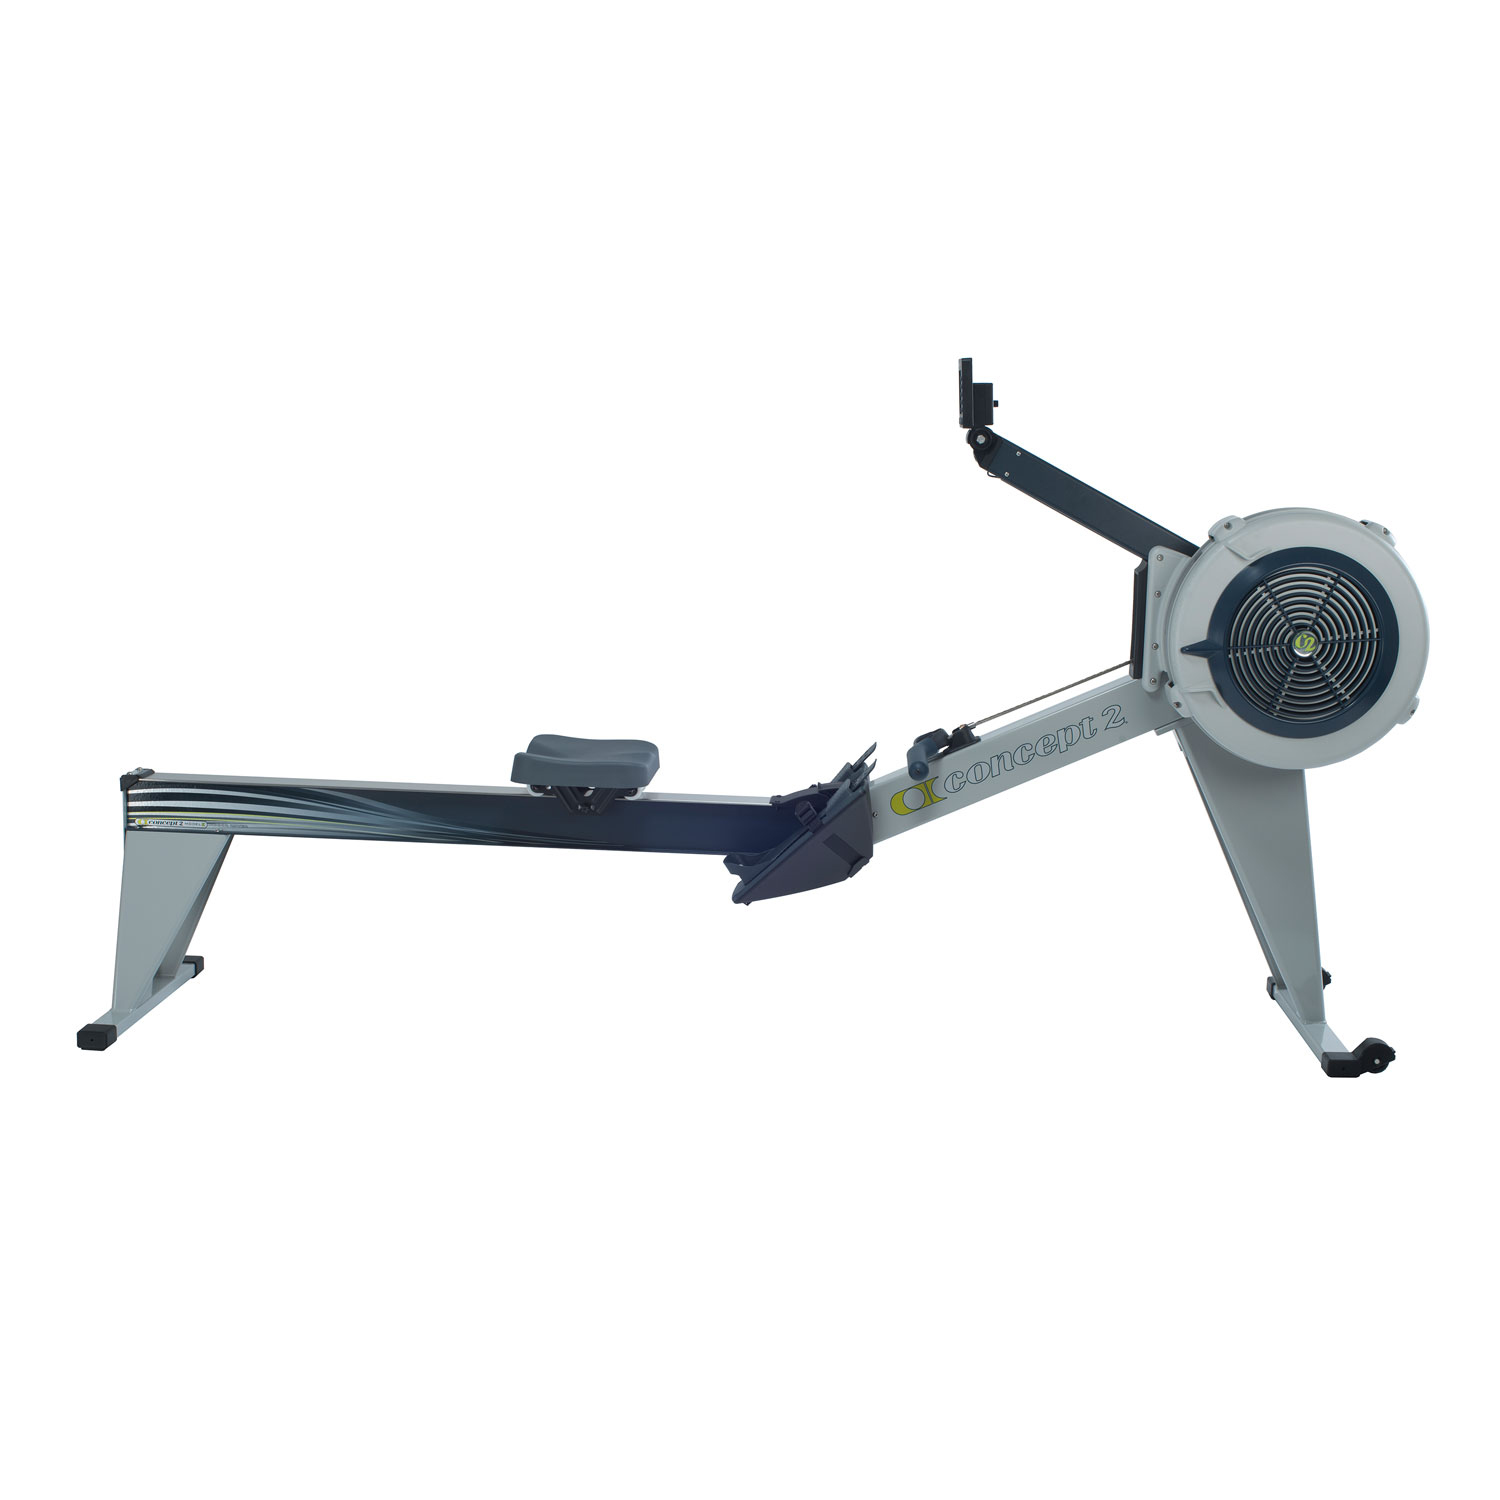 Concept2 Concept 2 Rowing Machine Model E with PM4 